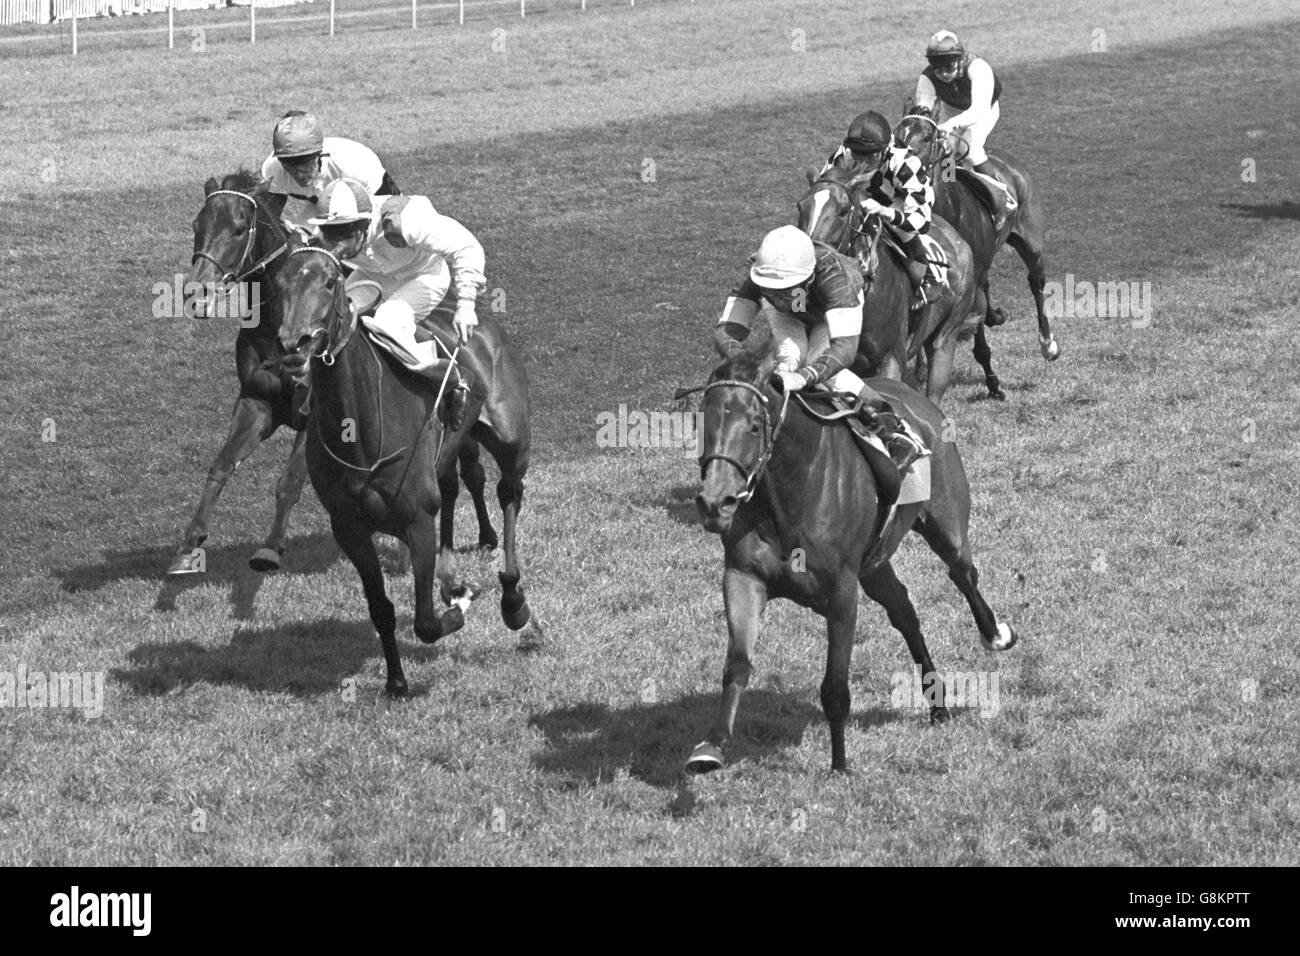 Circus Plume, ridden by Lester Piggott, wins the Oaks Stakes from Media Luna (P Cook) and Out of Shot (P Eddey). Stock Photo